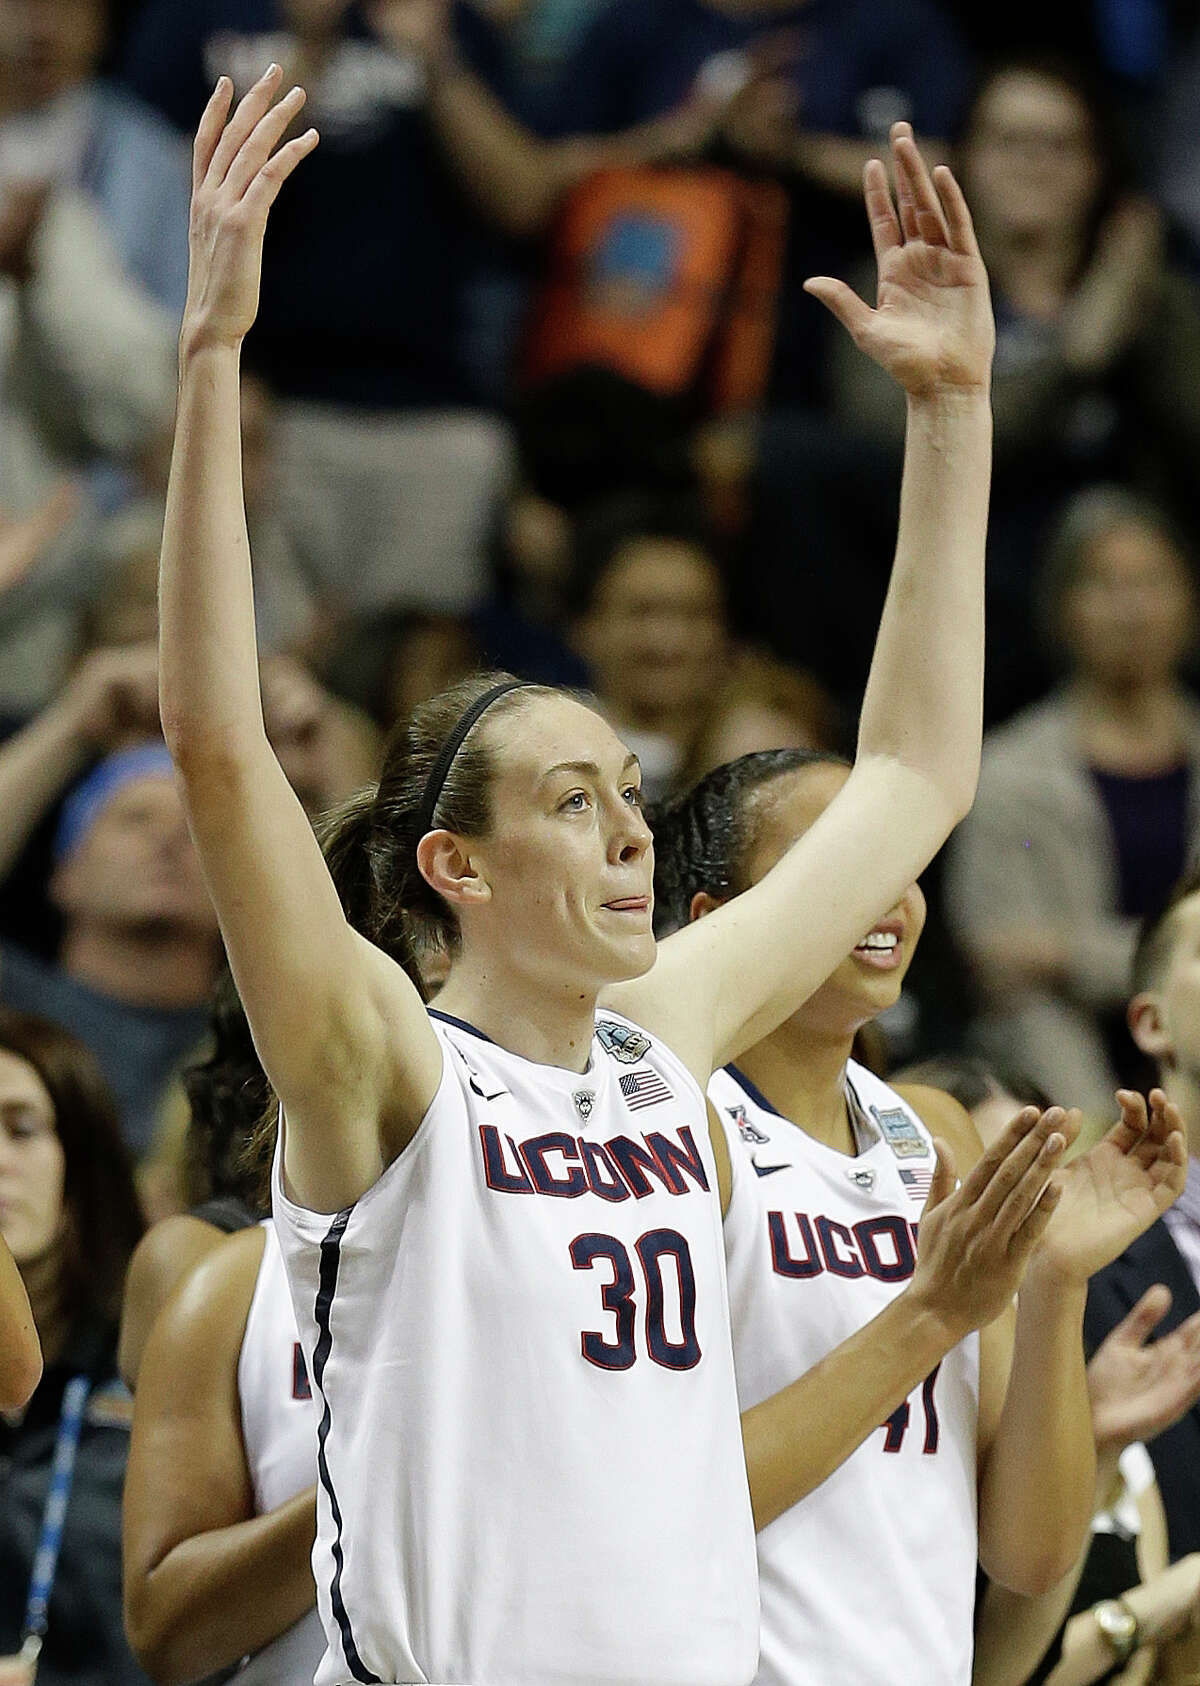 Connecticut forward Breanna Stewart (30) celebrates during the second half of the semifinal game against Stanford in the Final Four of the NCAA women's college basketball tournament, Sunday, April 6, 2014, in Nashville, Tenn. Connecticut won 75.56. (AP Photo/Mark Humphrey) ORG XMIT: TNMS194